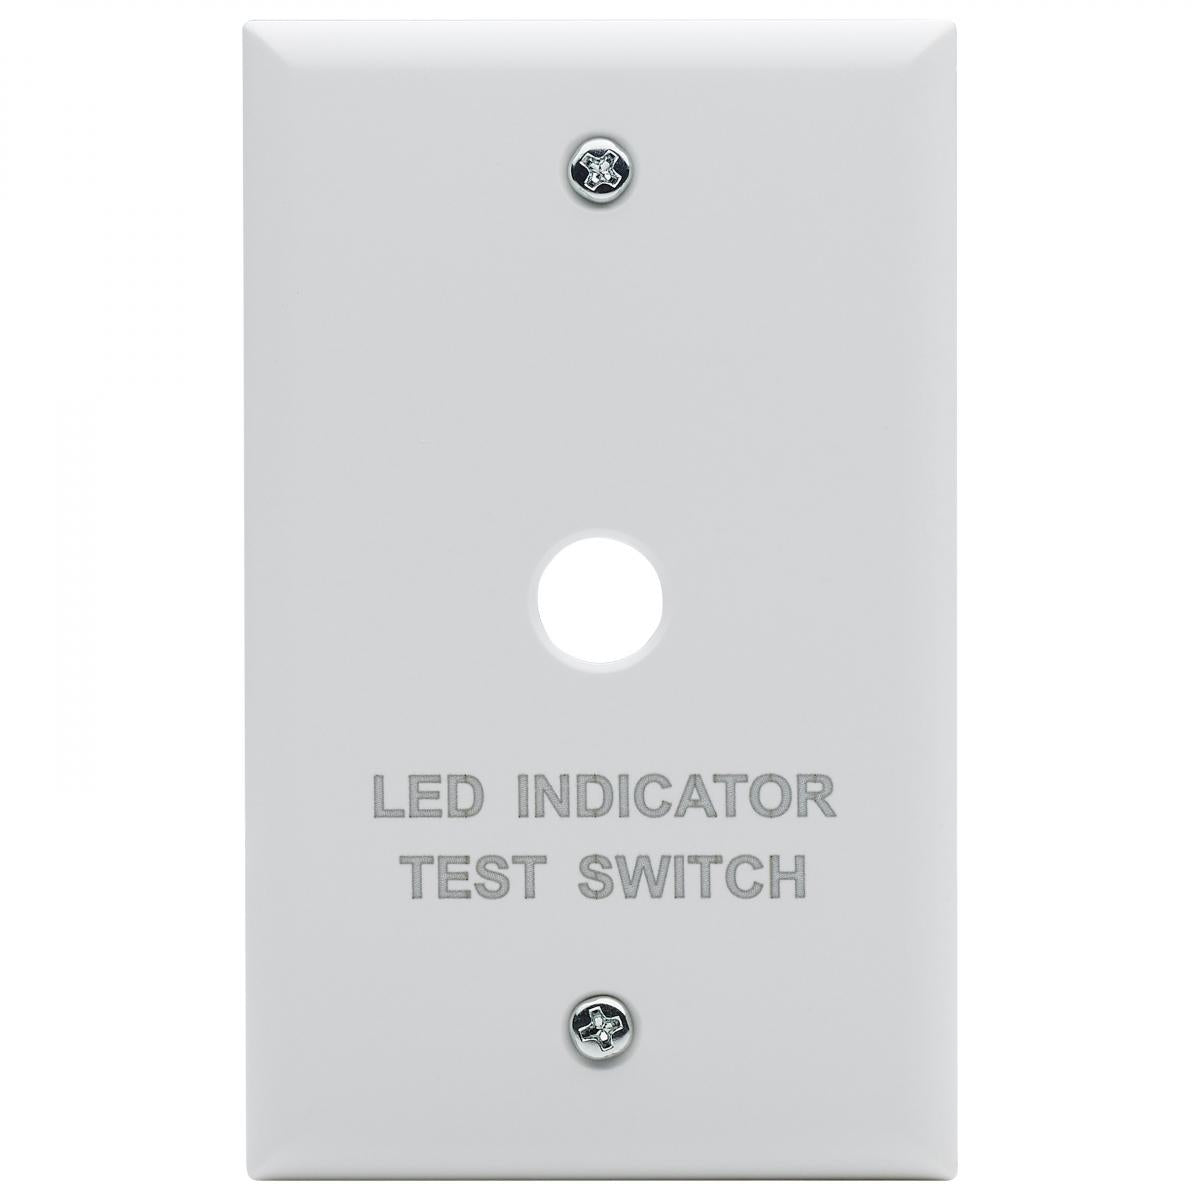 Emergency Remote Test Switch, Single Gang Plate, White Finish - Bees Lighting